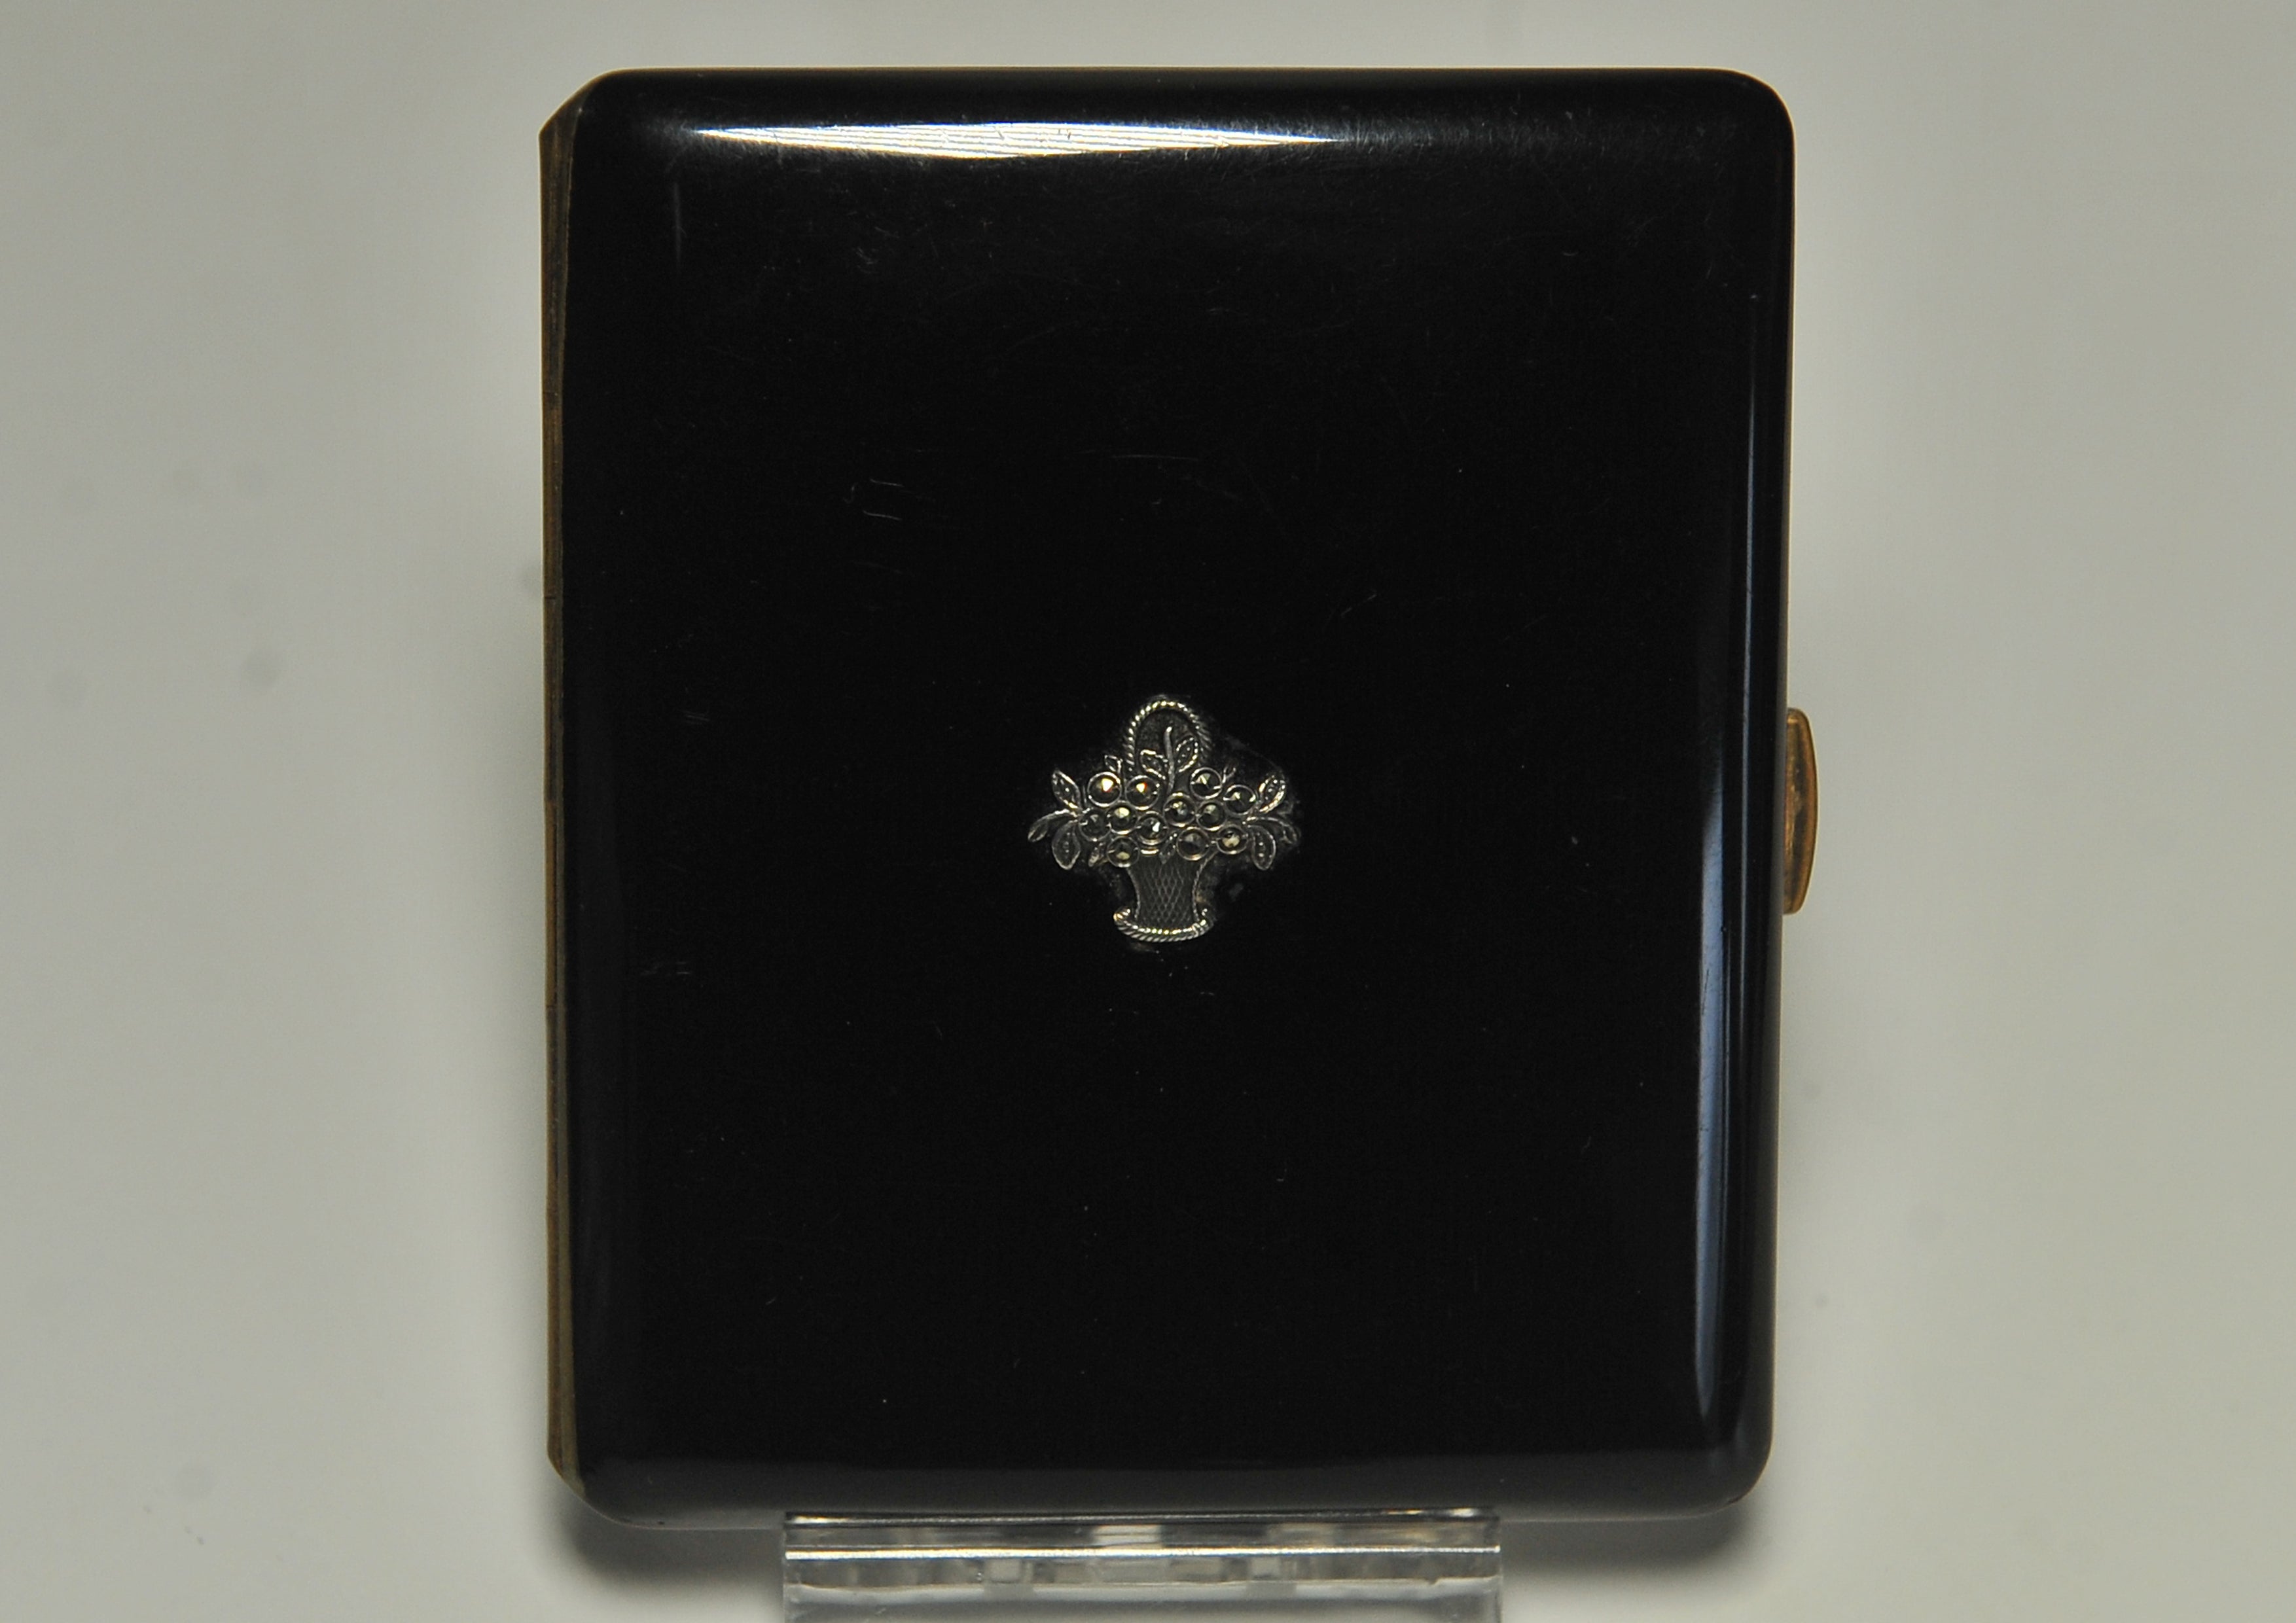 Art Deco Ladies Black Lacquer & Marcasite Cigarette & Matchstick Case 1930's. 
Both Within a Shagreen Presentation Case. 

Item Was By Esteemed British Luxury Brand Finnigans of Deansgate Manchester.

The House of Finnigans was a British luxury